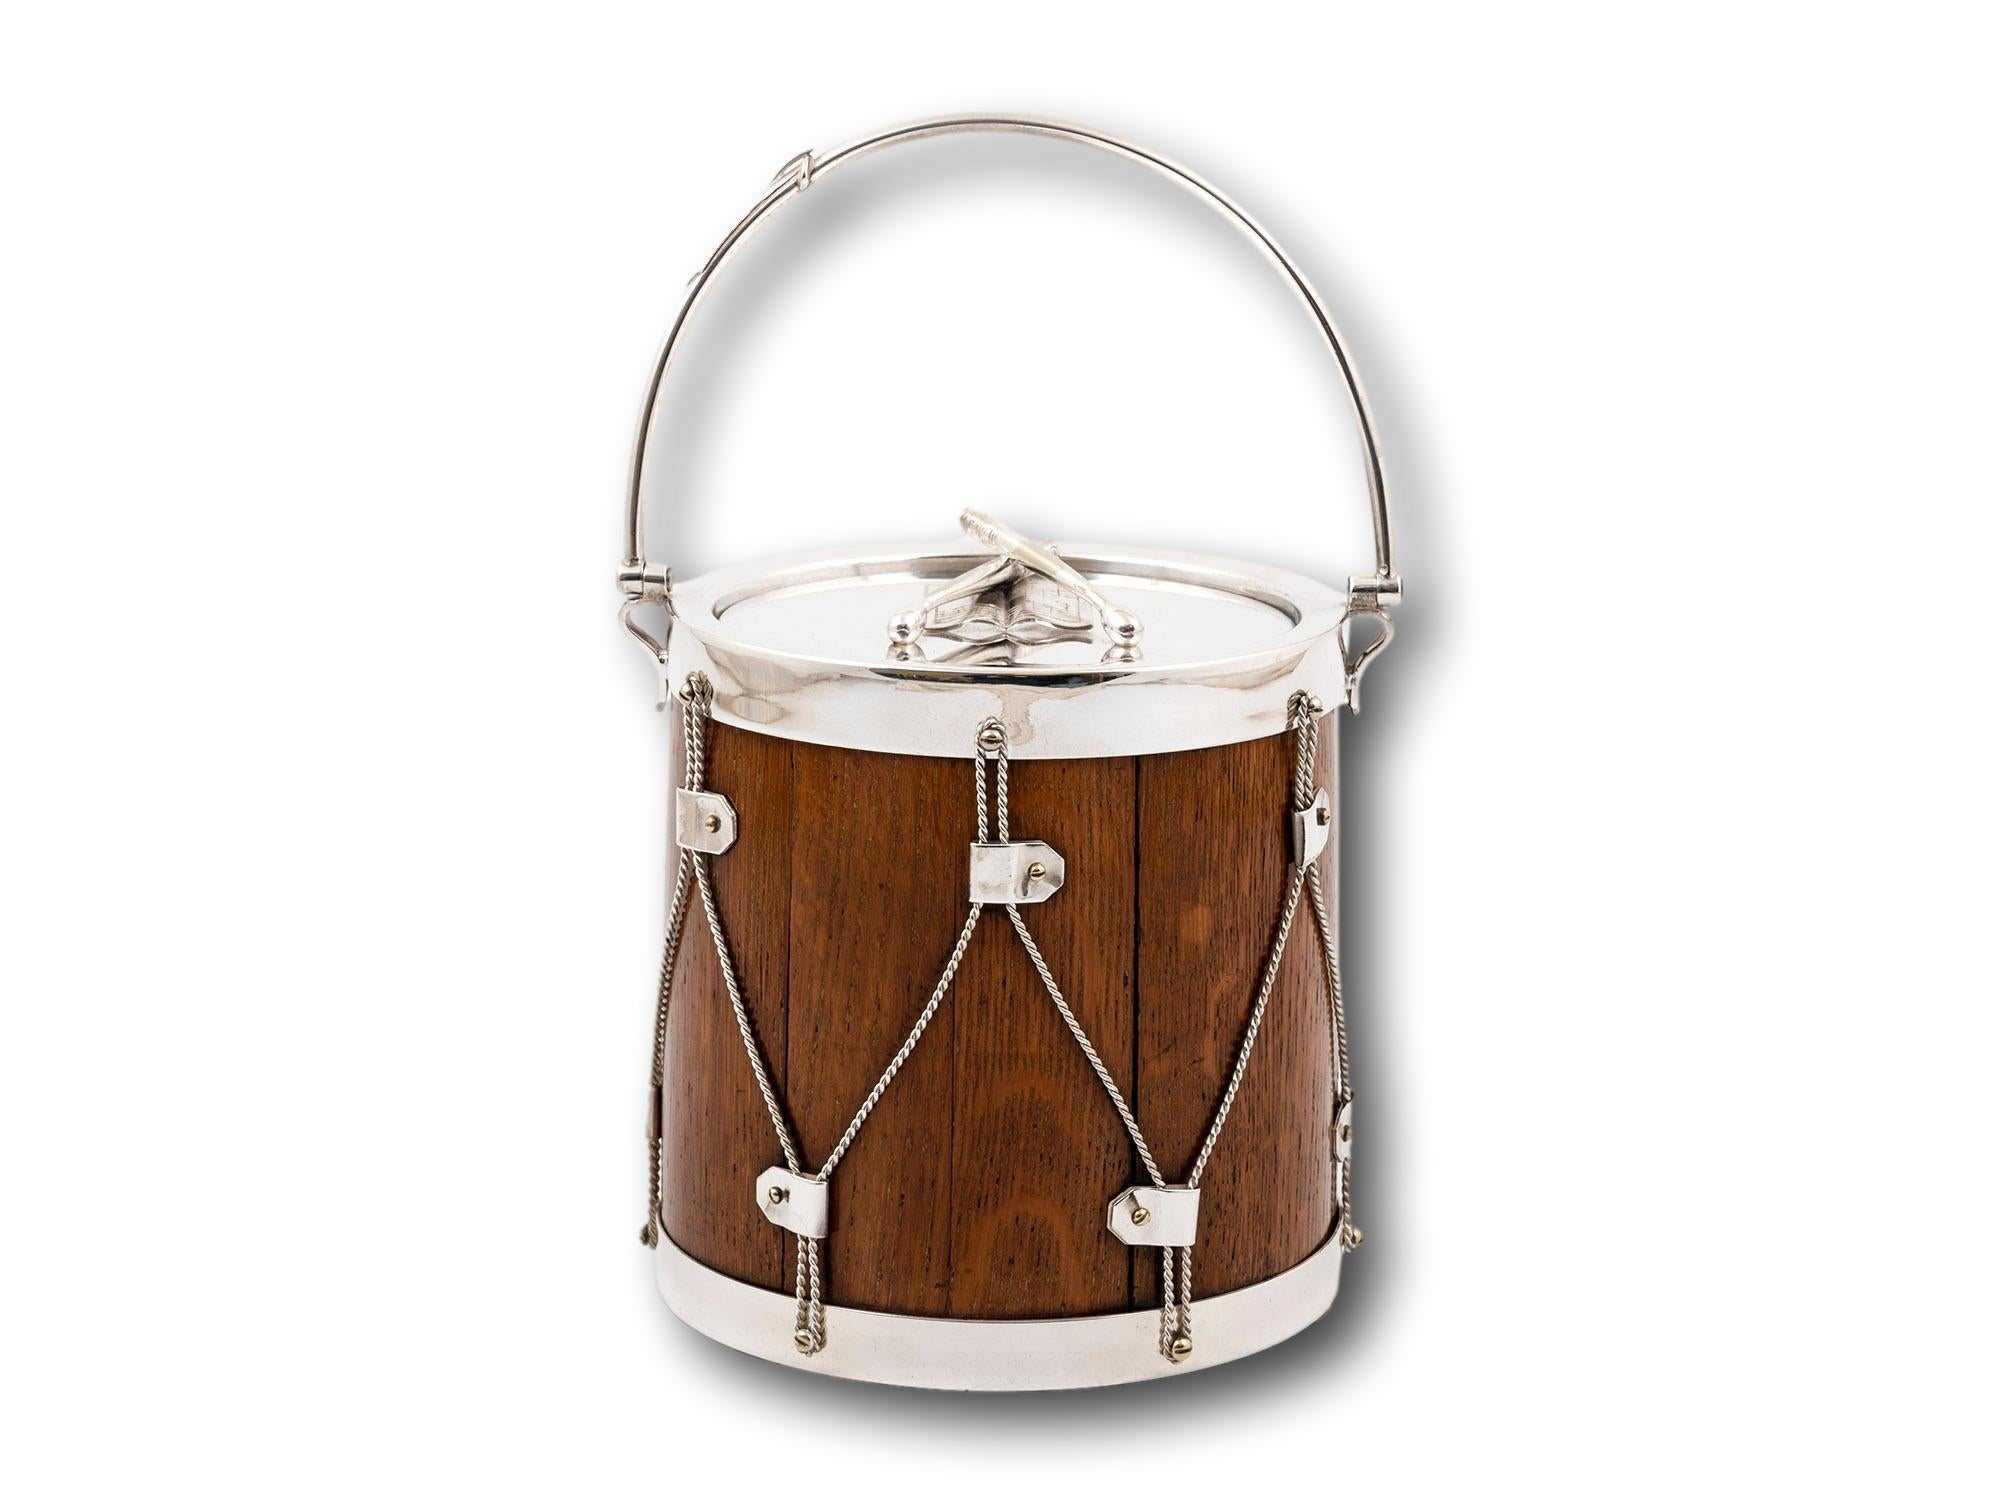 In the Form of a Drum 

From our Accessories collection, we are pleased to offer this Novelty Silver Plate Military Drum Biscuit Barrel. The Biscuit Barrel of novelty form in the shape of a antique military drum with an Oak shell,  silver plate